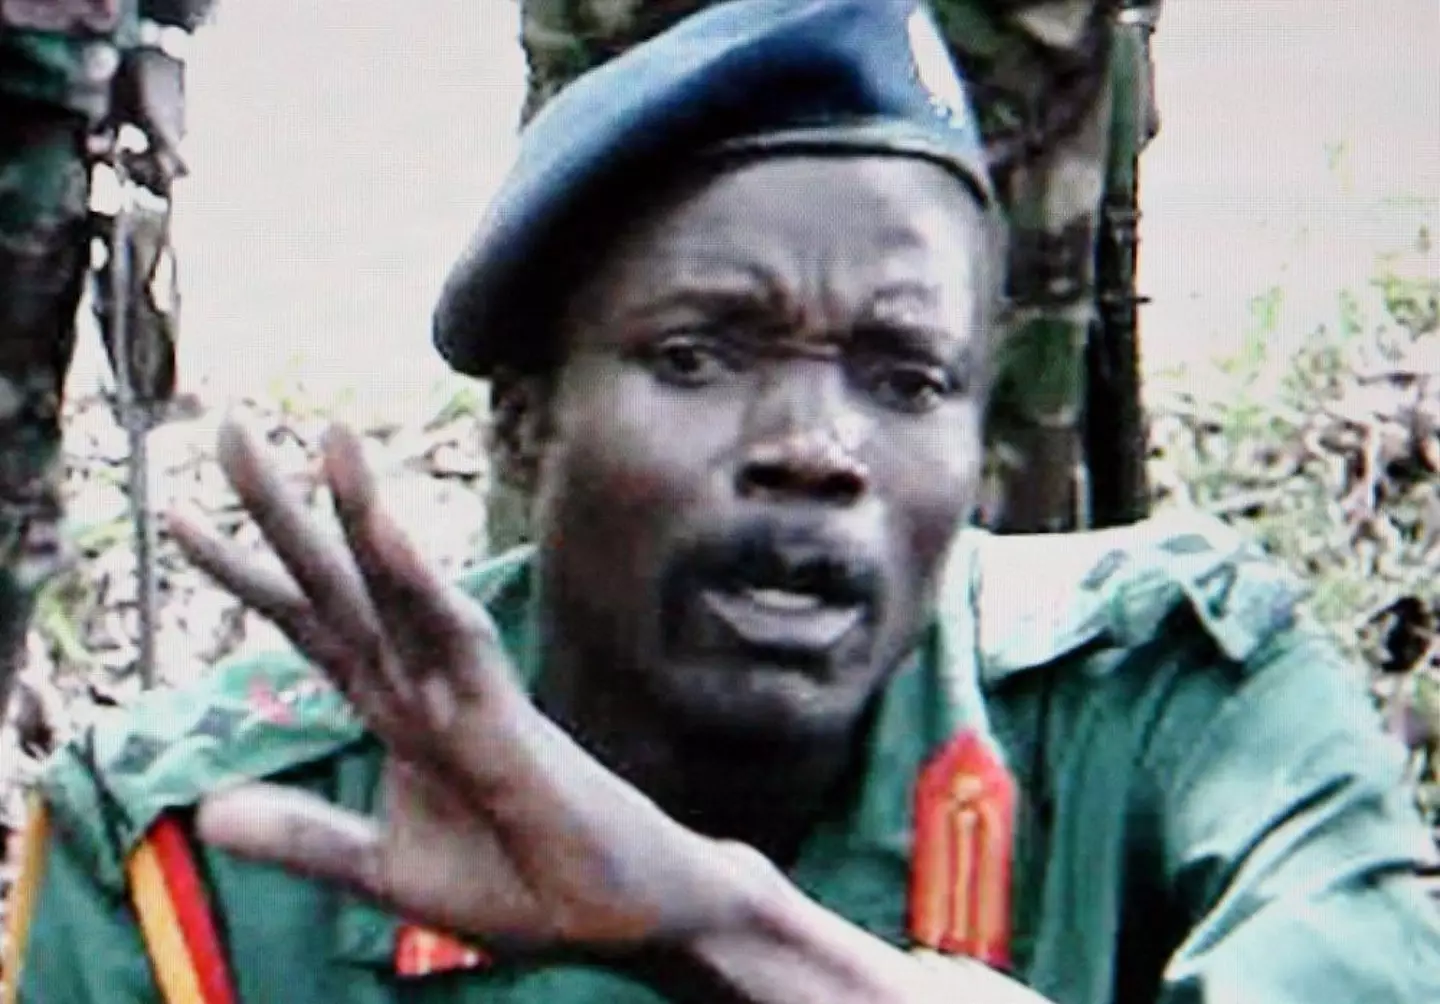 Joseph Kony of the Lord's Resistance Army is accused of numerous crimes against humanity.